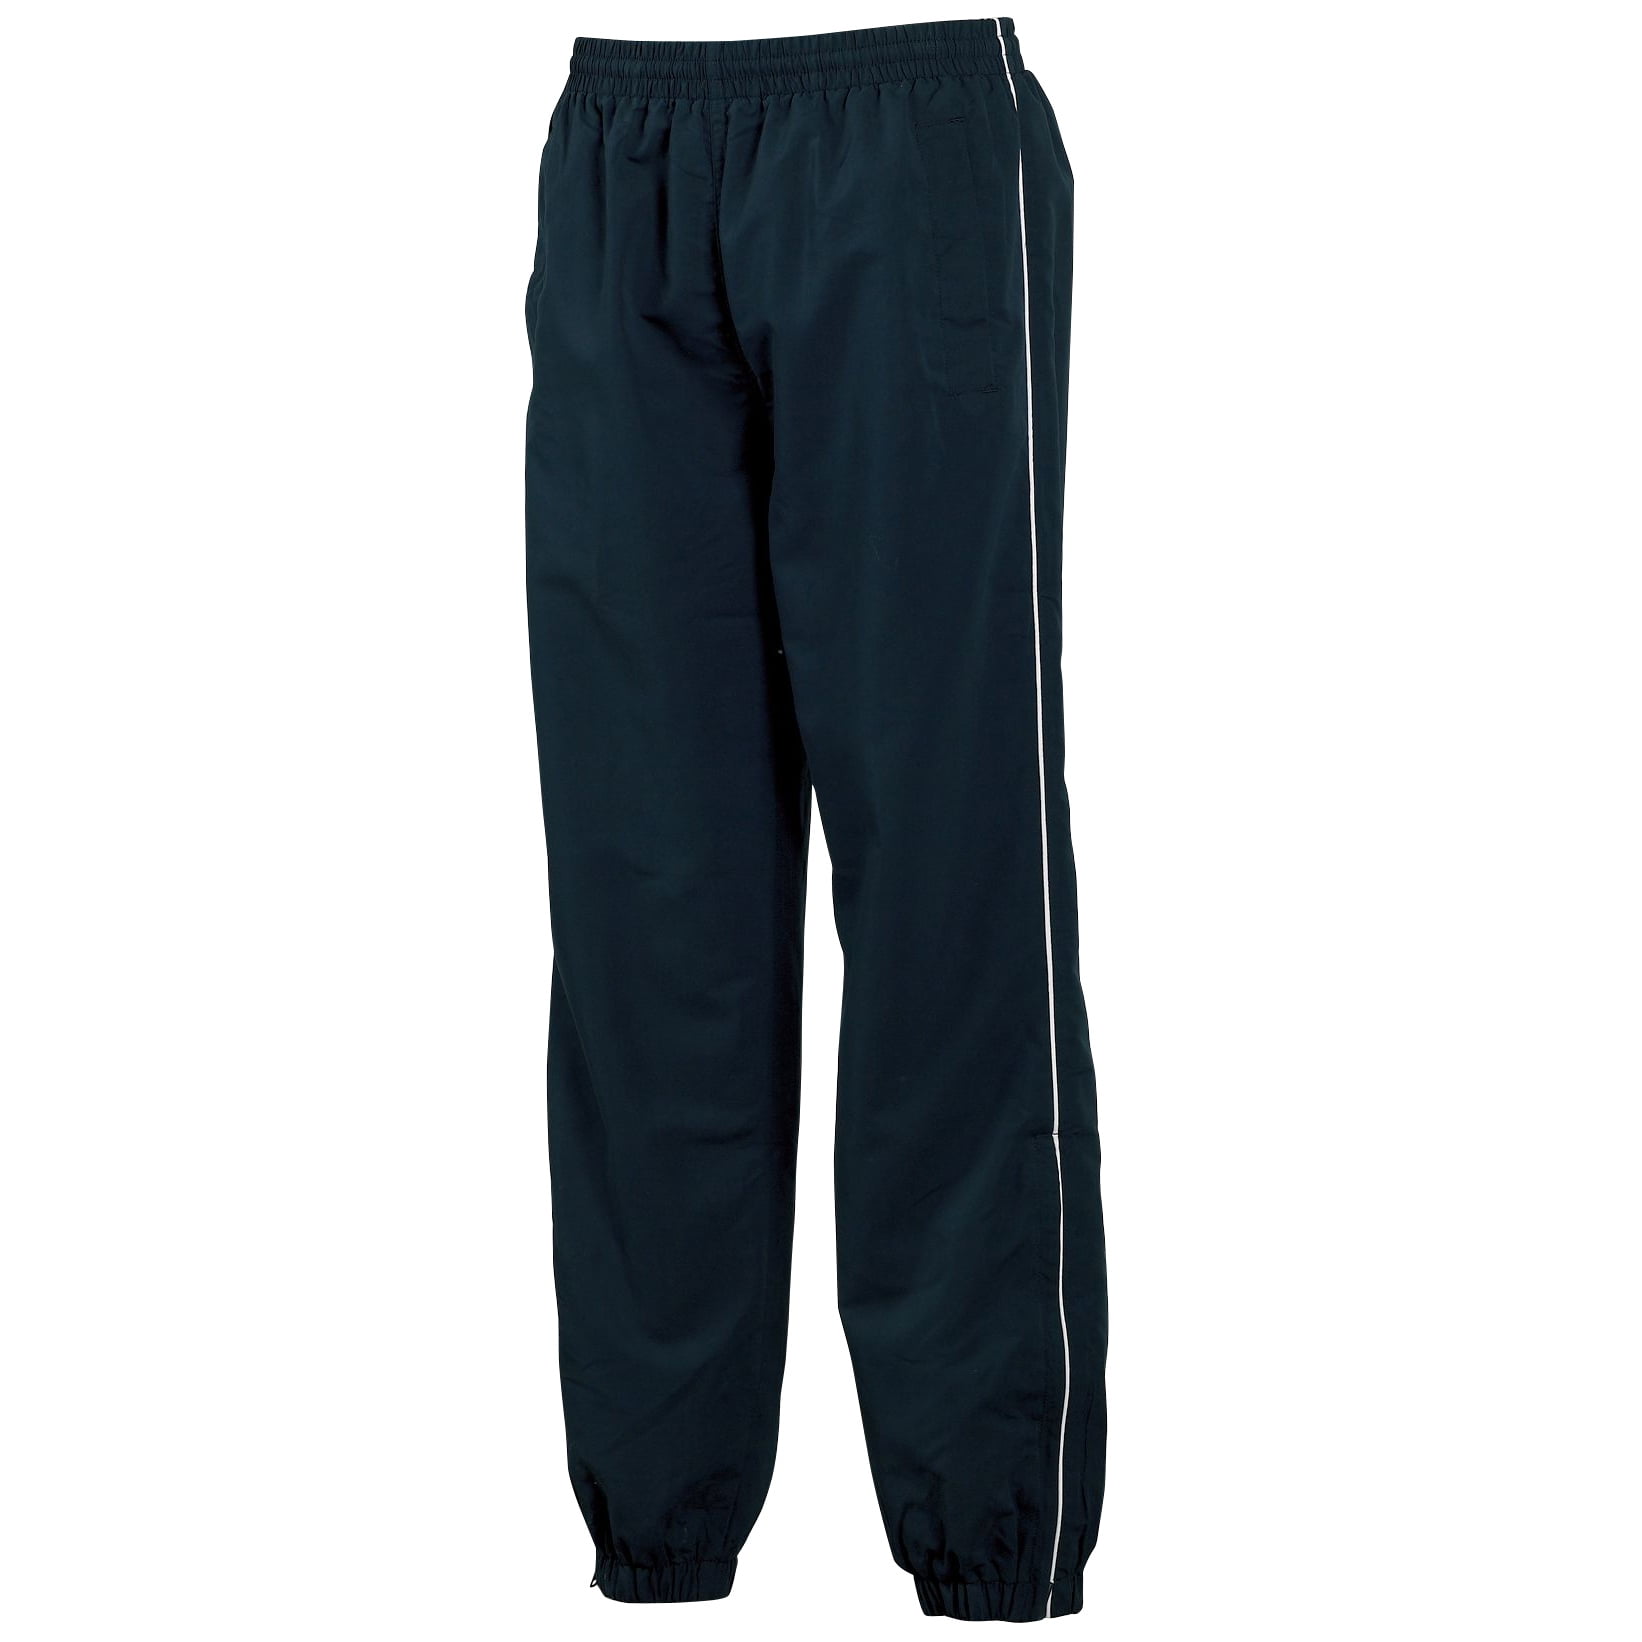 Tombo Teamsport Mens Piped Lined Sports Training Pants / Tracksuit ...